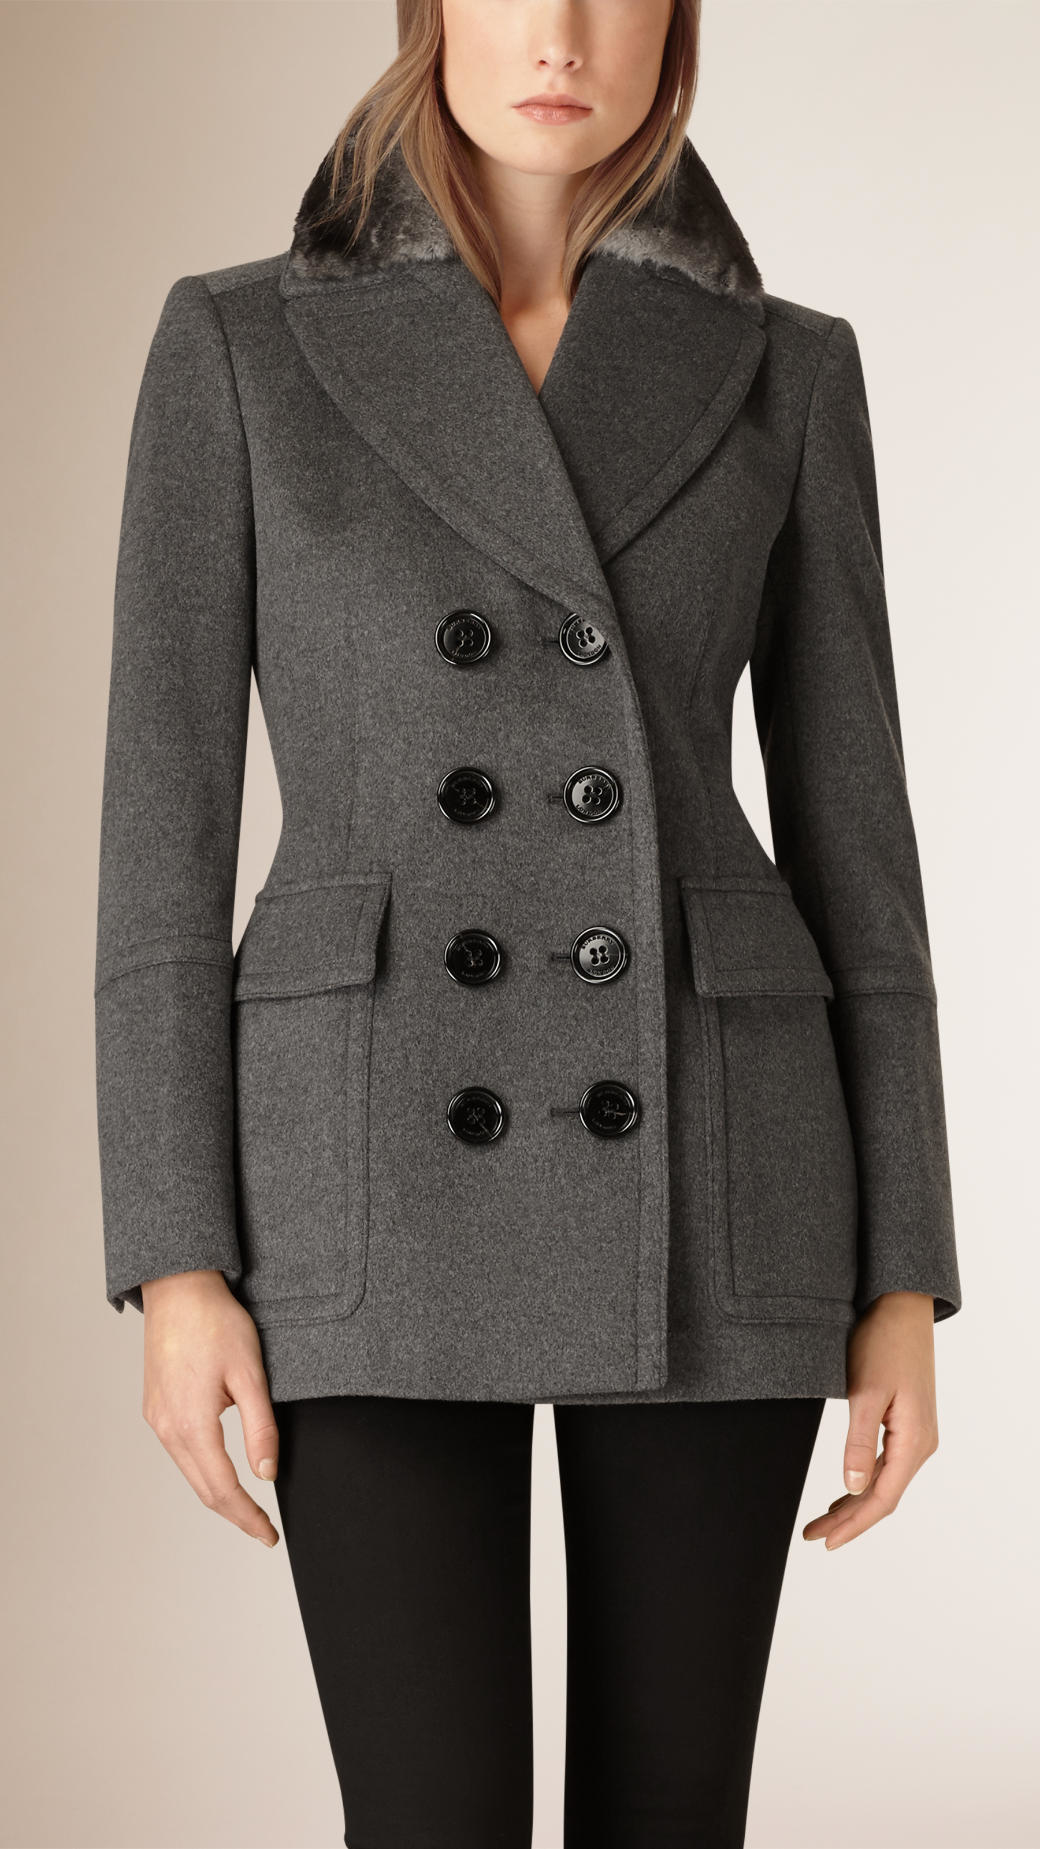 Women's Long Cashmere Coat With Fur Collar | Division of Global Affairs